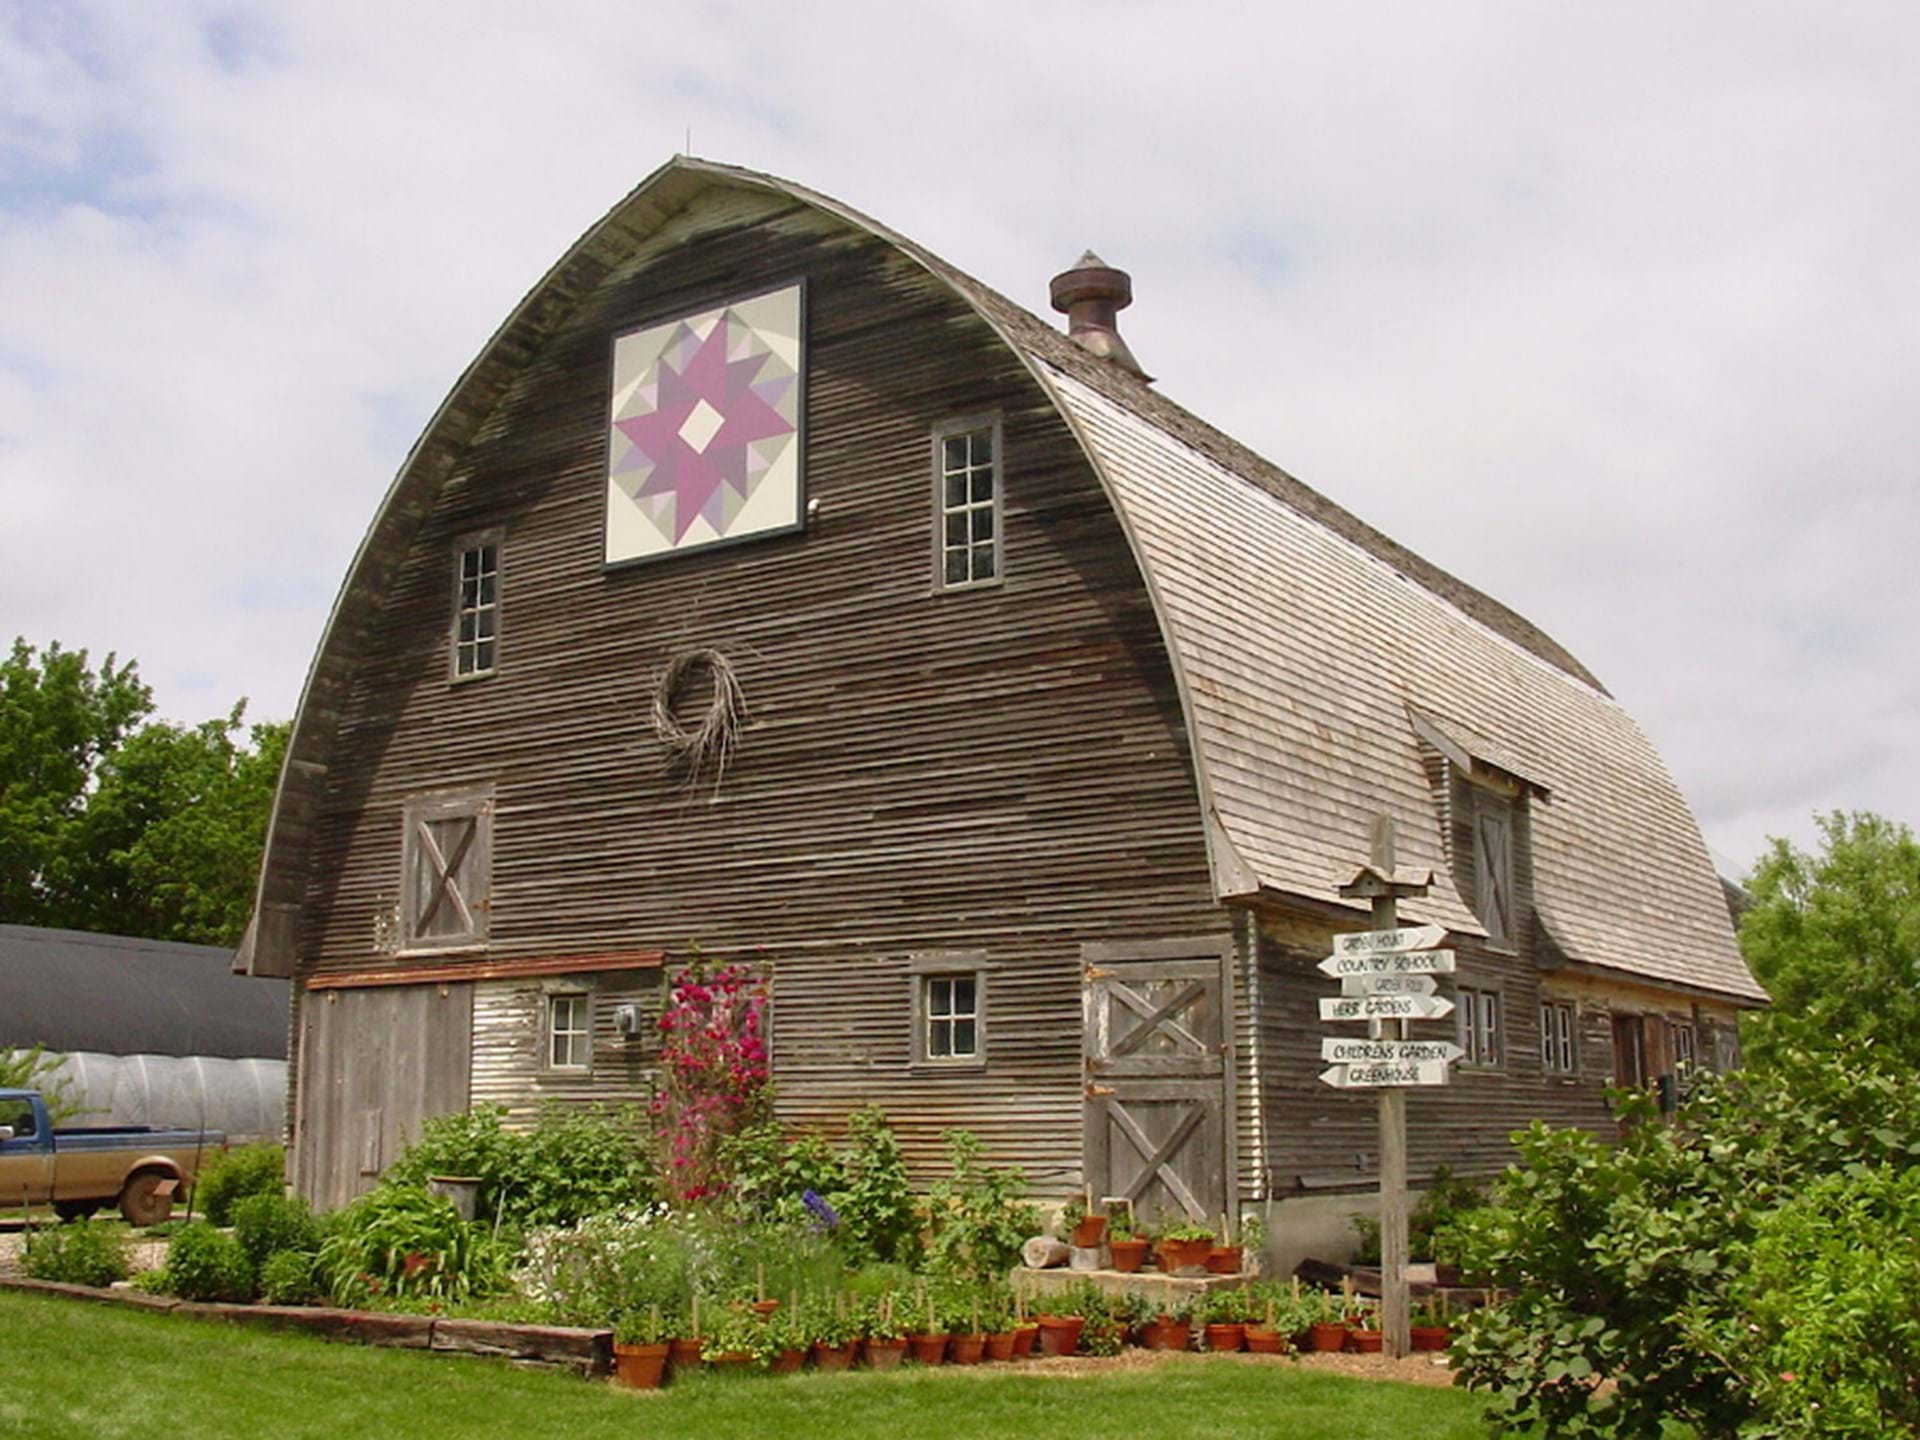 Double Aster barn quilt